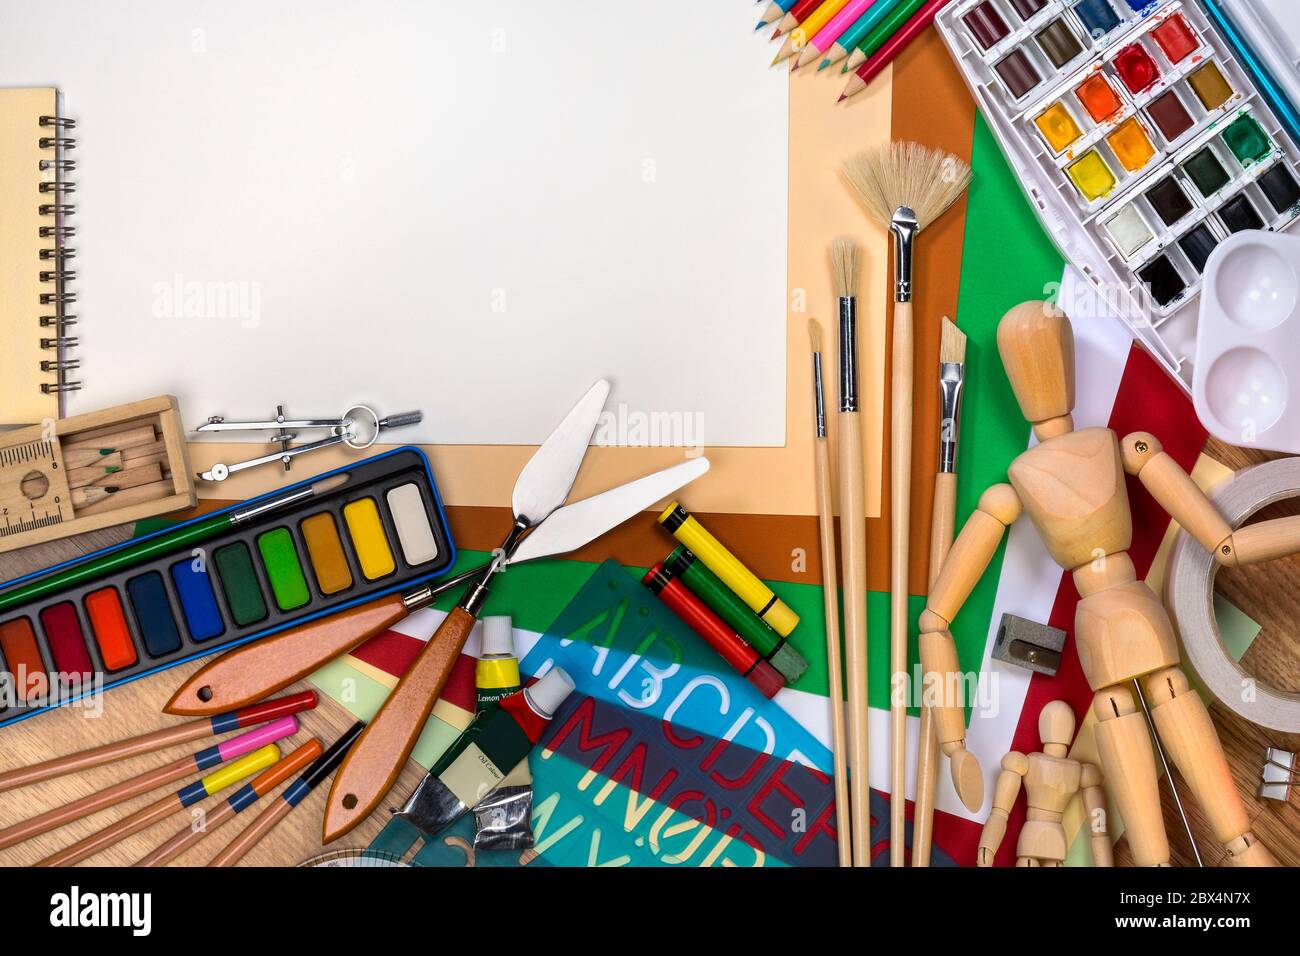 School Art Materials - Space for Text Stock Photo